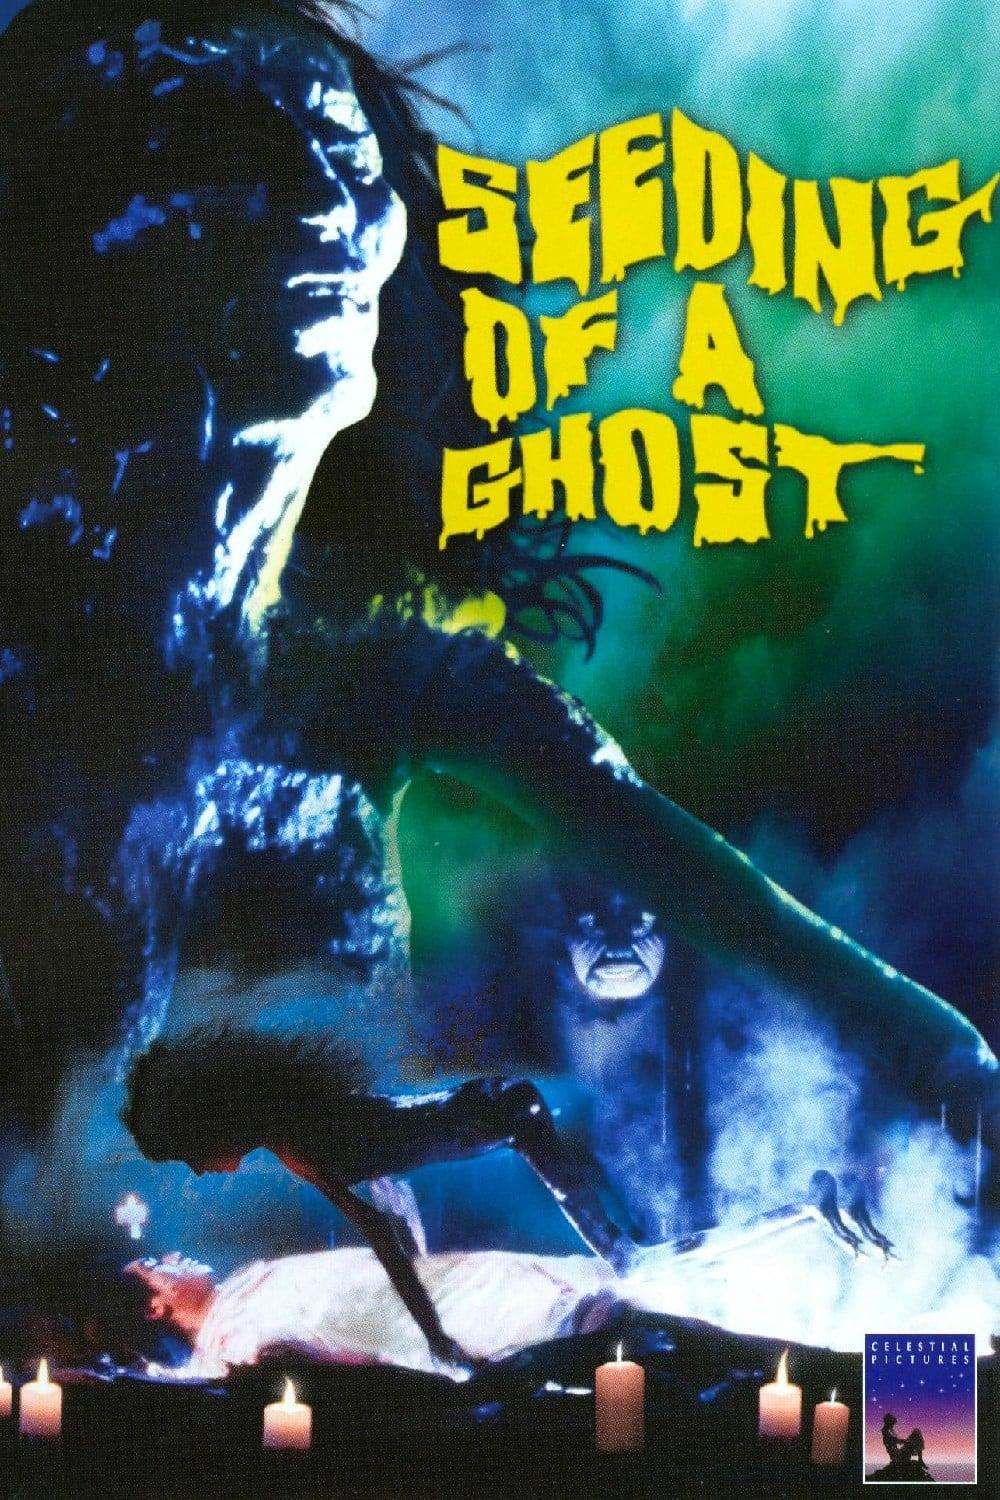 Seeding of a Ghost poster